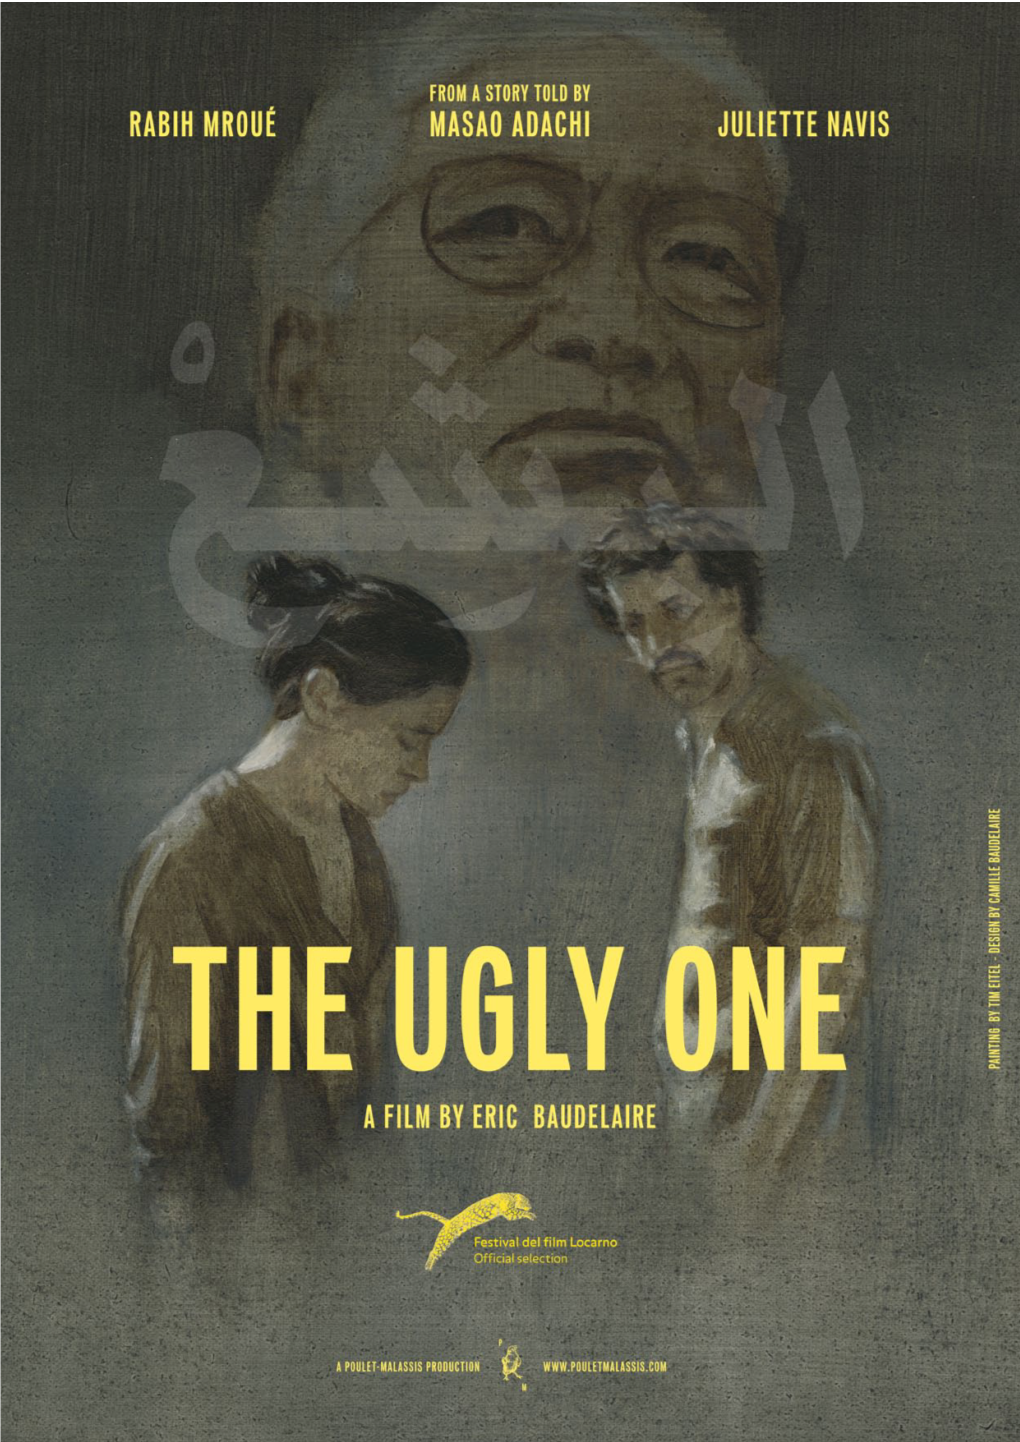 THE UGLY ONE DOSSIER DE PRESSE — 1 — the Ugly One -- a ﬁlm by Eric Baudelaire from a Story Told by Masao Adachi